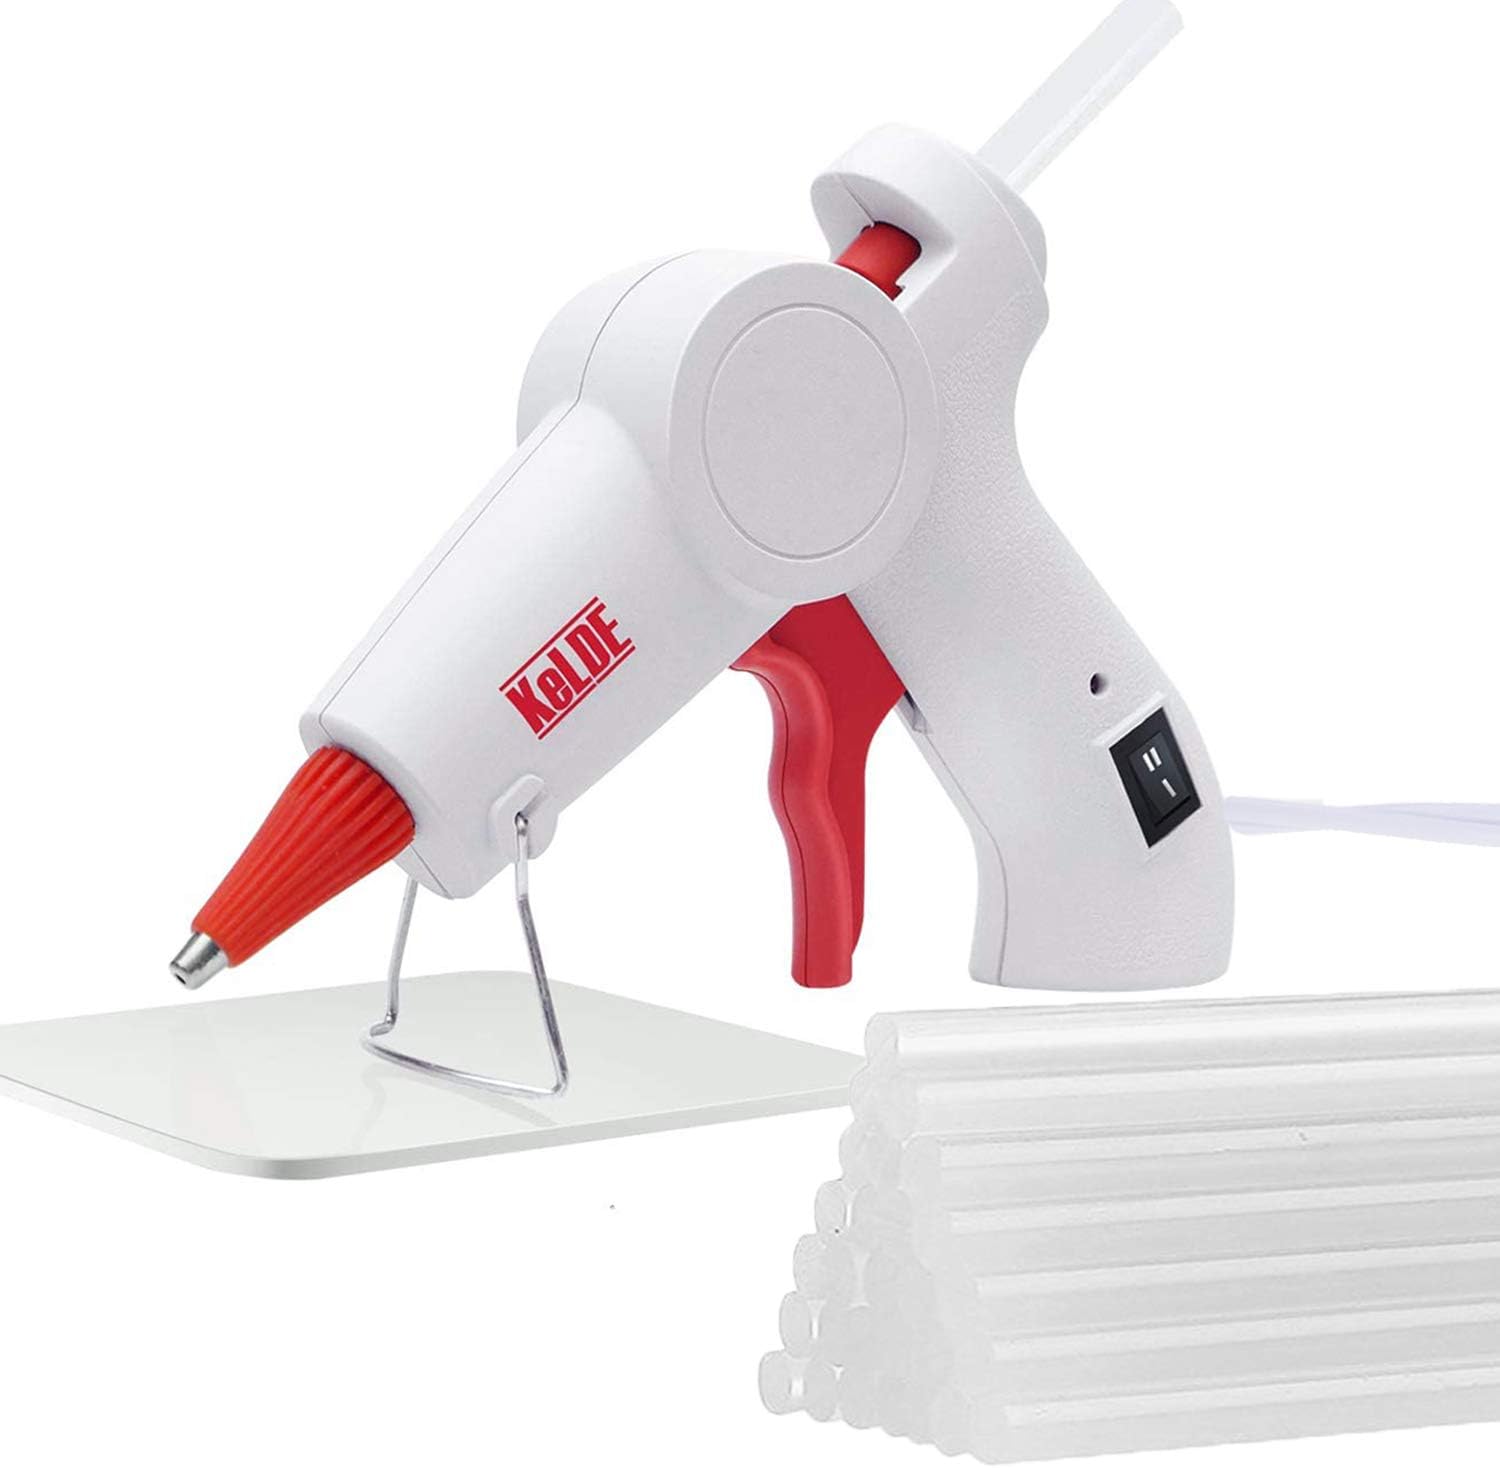 KeLDE Dual Temperature Hot Glue Gun - Mini Size Glue Gun with 25PCS Hot  Glue Sticks and Rubber Pad for DIY, Carft Projects and Home R